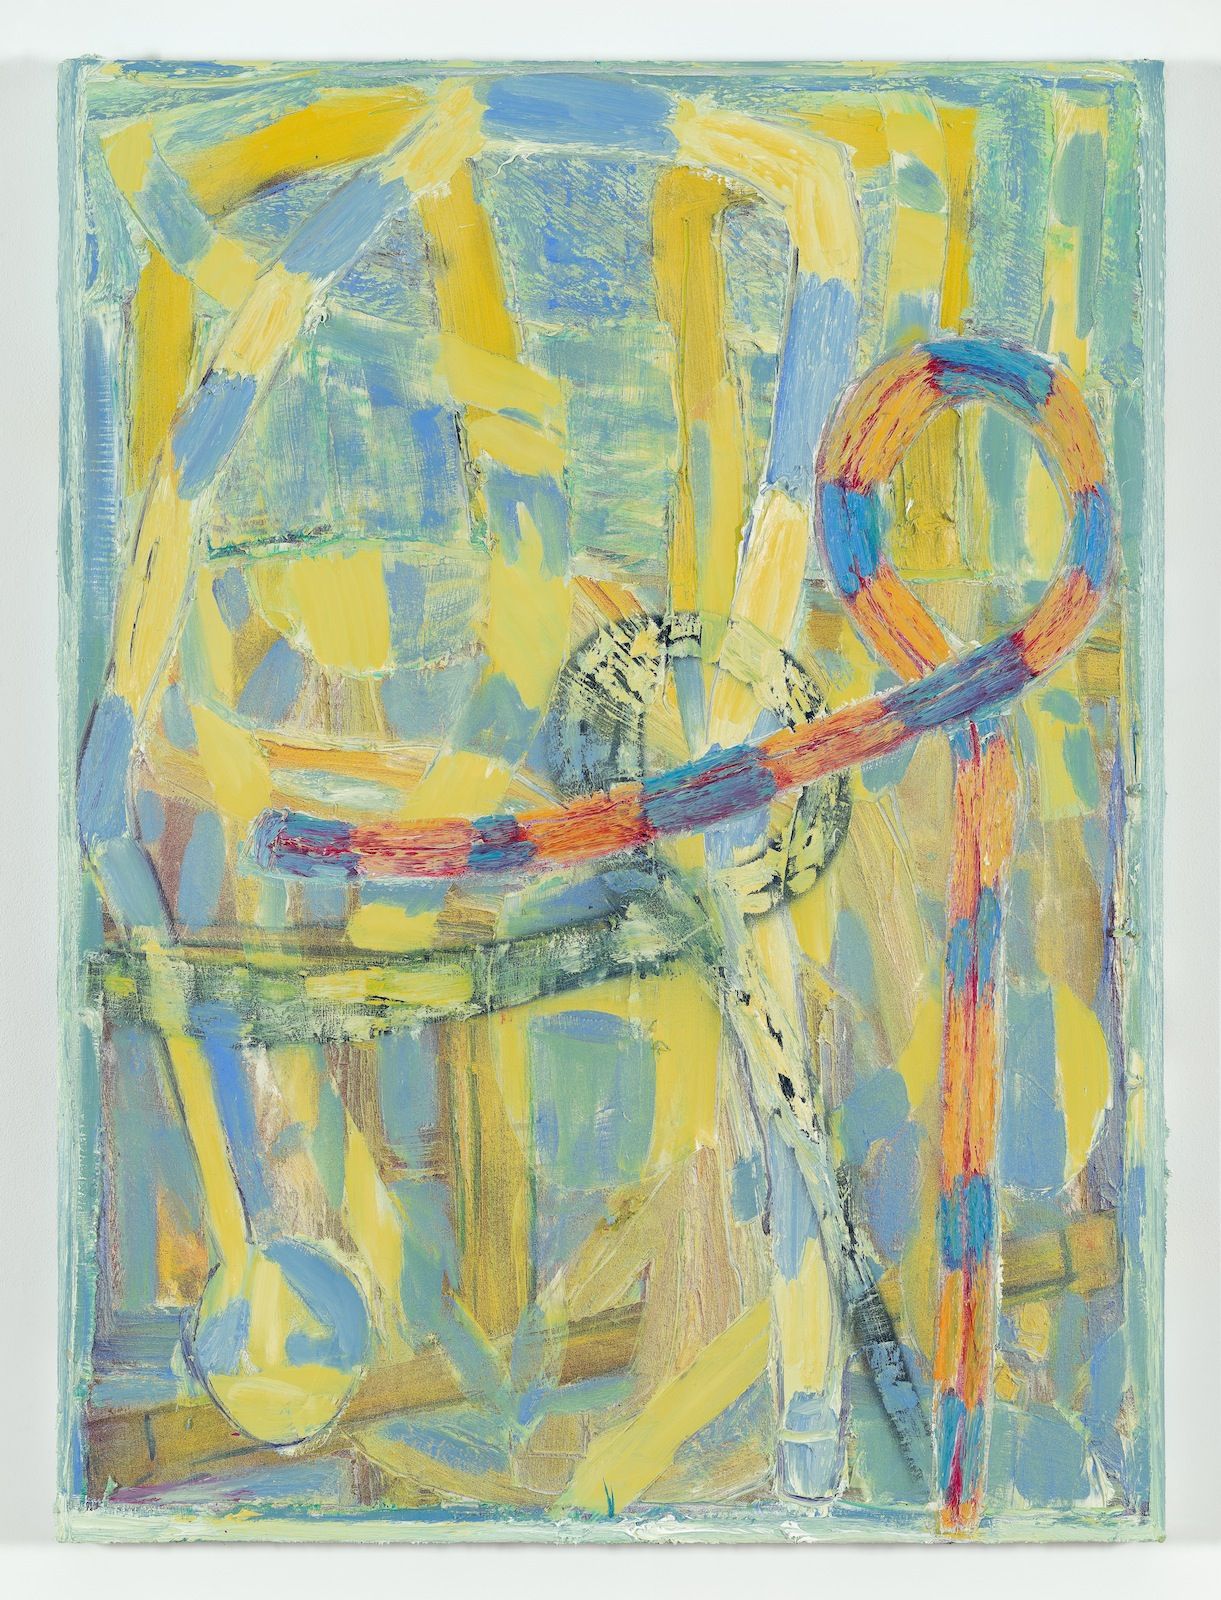 Gabriel Hartley, Magnifier, 2014, oil and spray paint on canvas, 63 × 47 in.